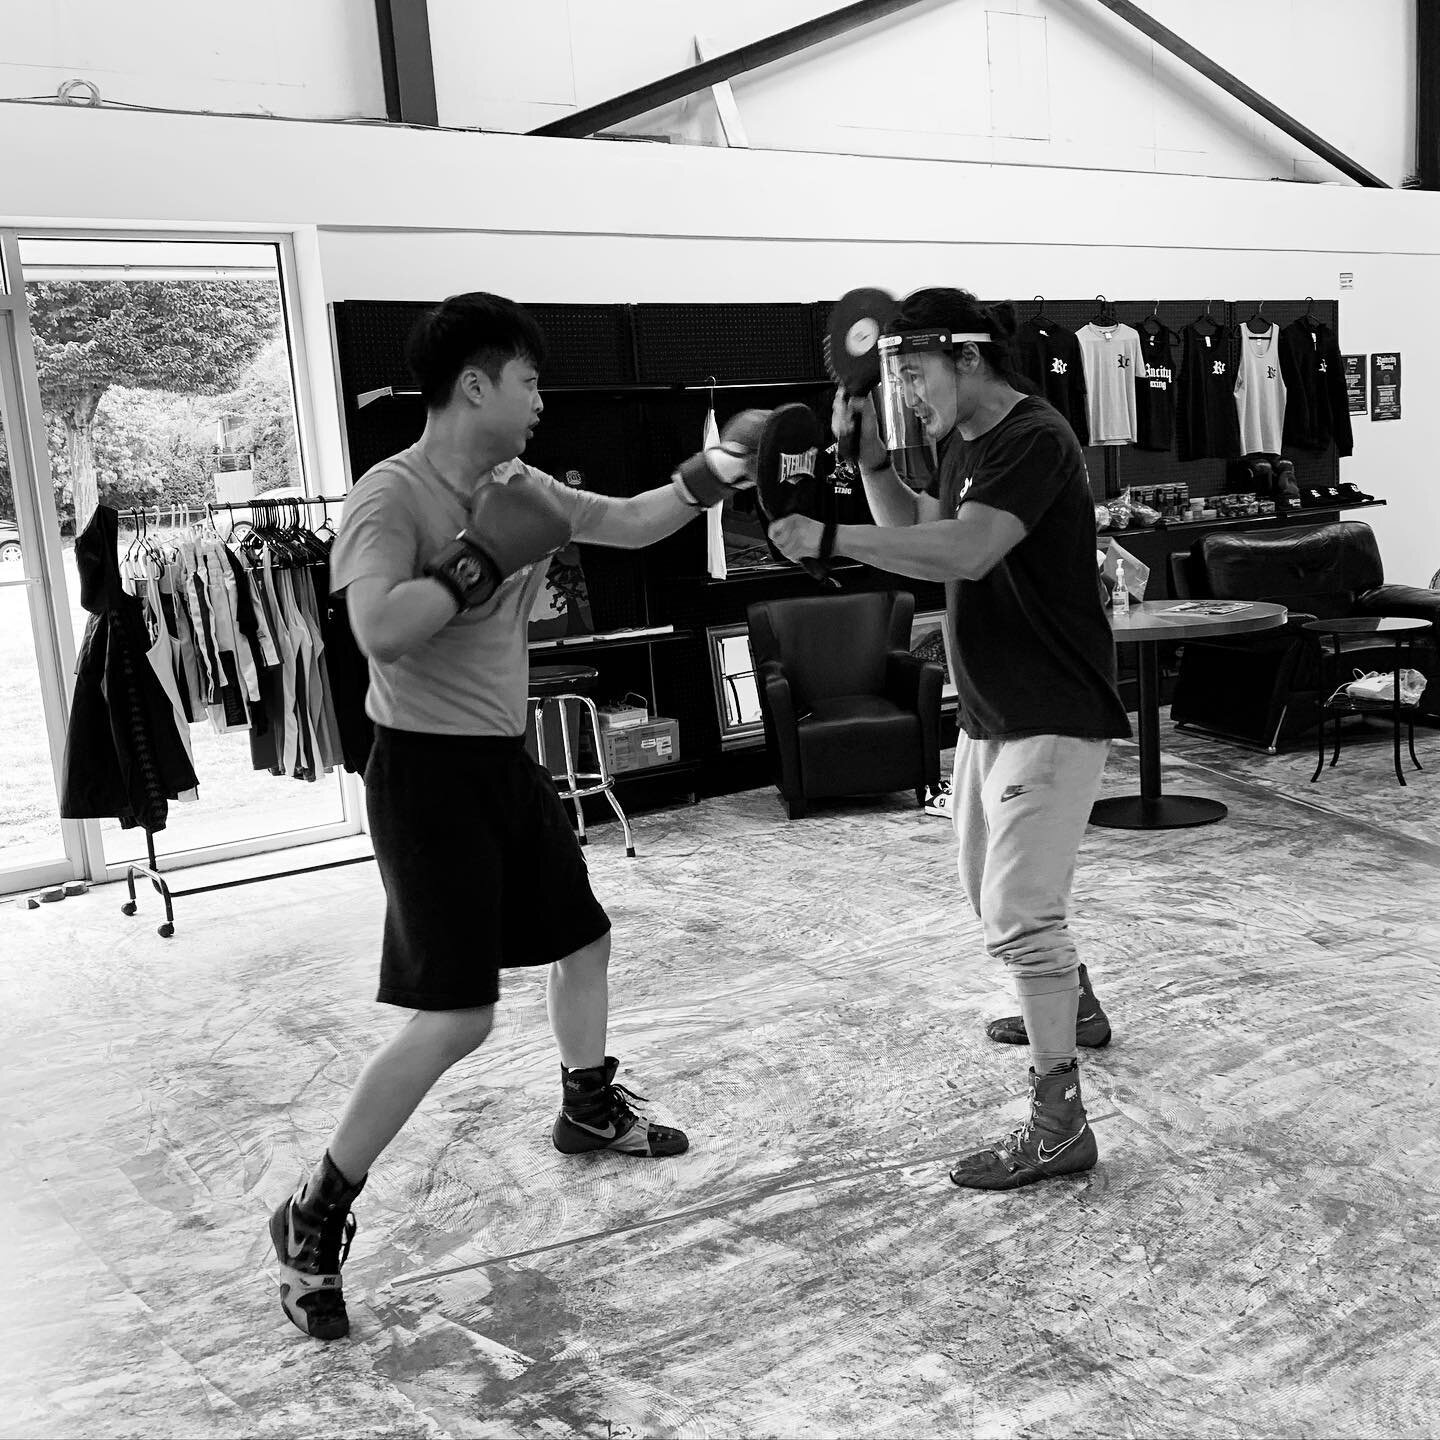 Want to learn how to box but not sure where to start? Book a session with our experienced coaches for one on one coaching! 🥊

#raincityboxing #boxingworkout #boxingworld #boxer #fighter #weekendworkout #boxing #boxeo #athlete #boxinggym #fitnessmoti